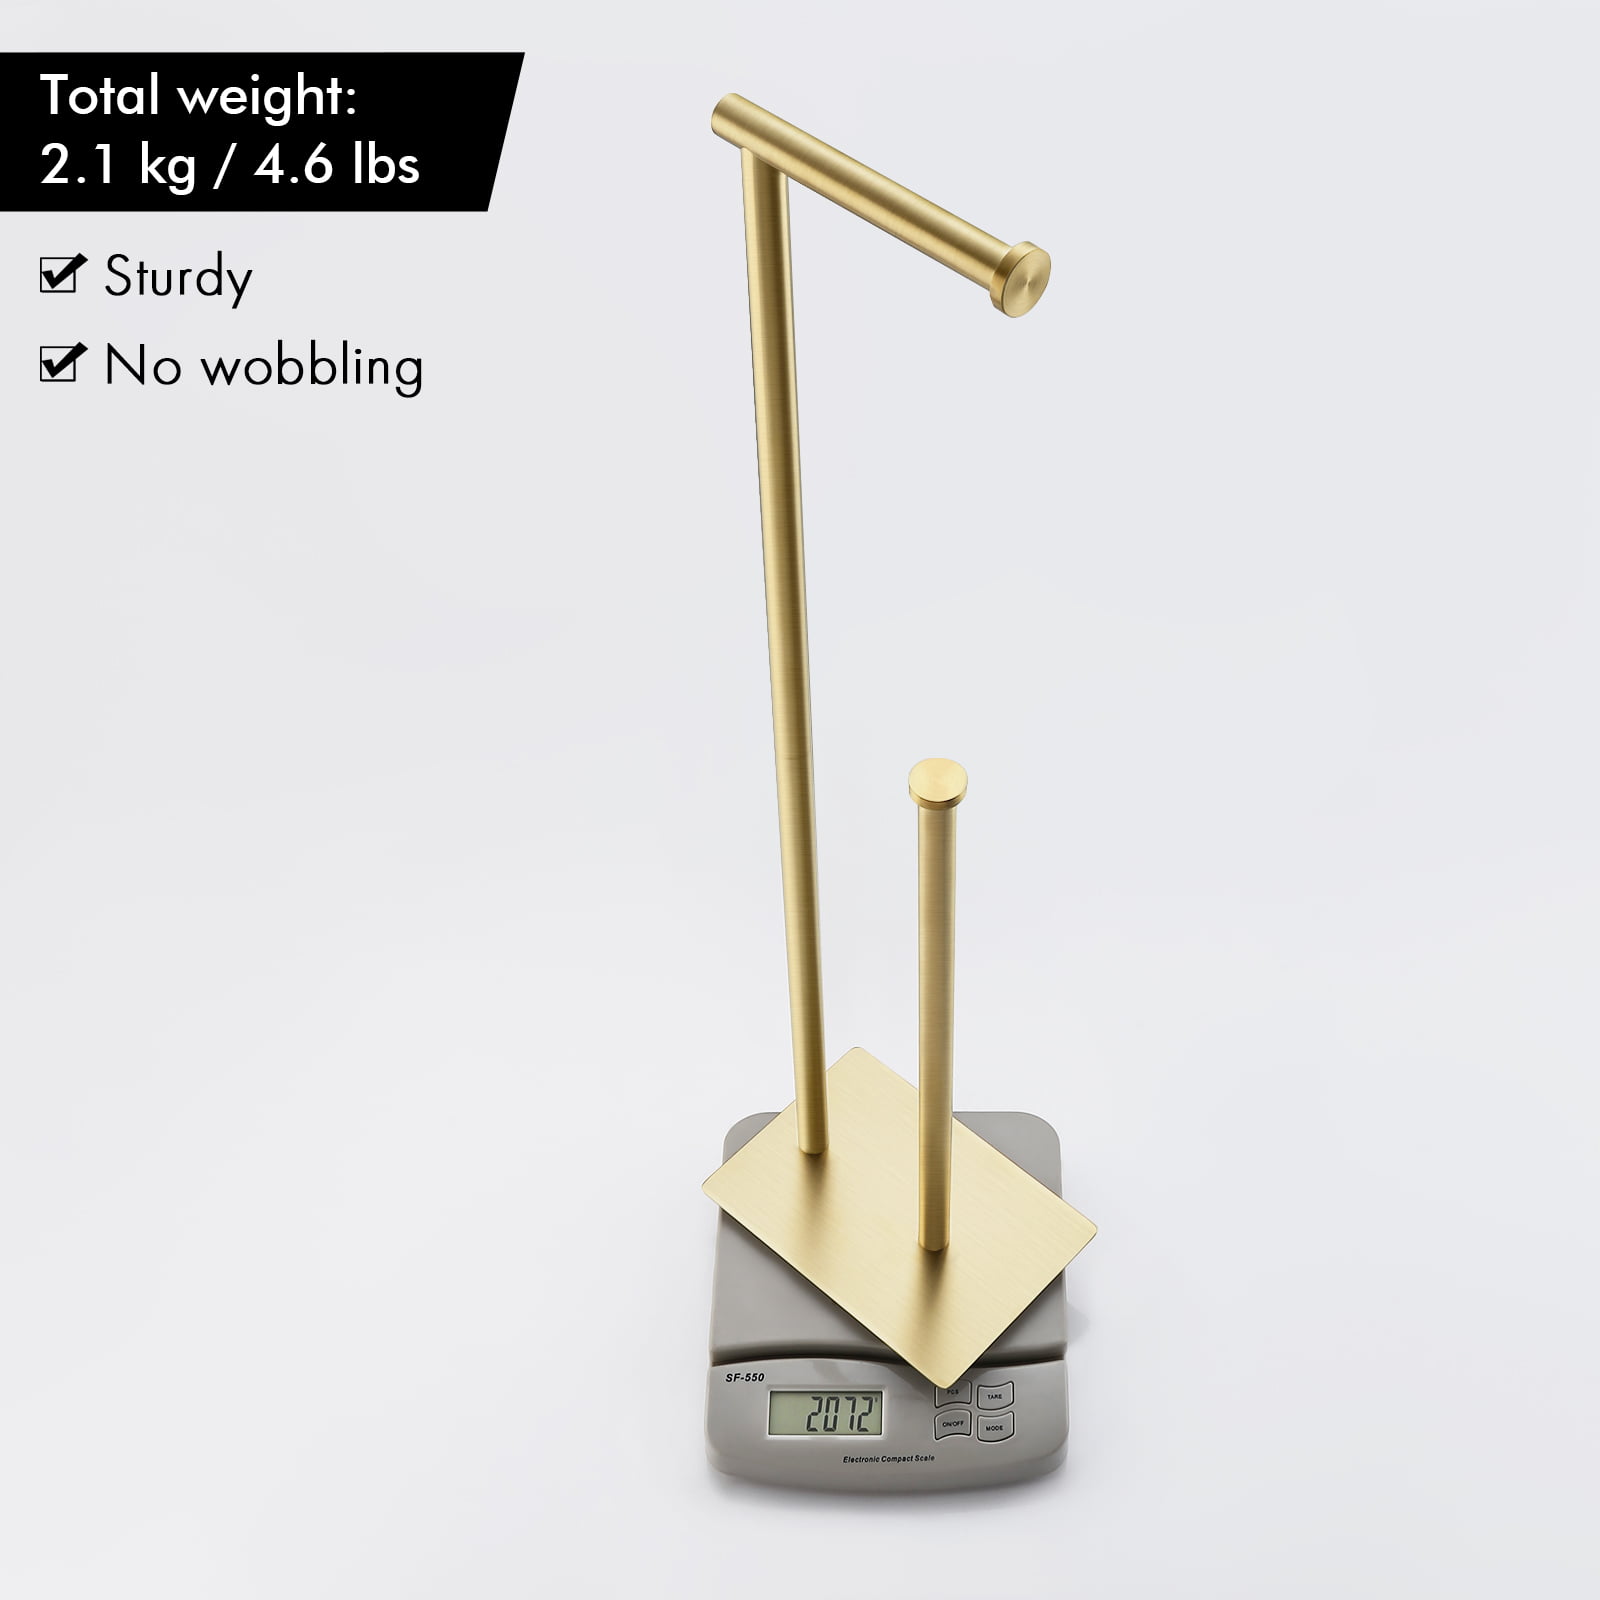 KESGold Paper Towel Holder Countertop Stainless Steel Brushed Brass Finish  WMPTH001BZ